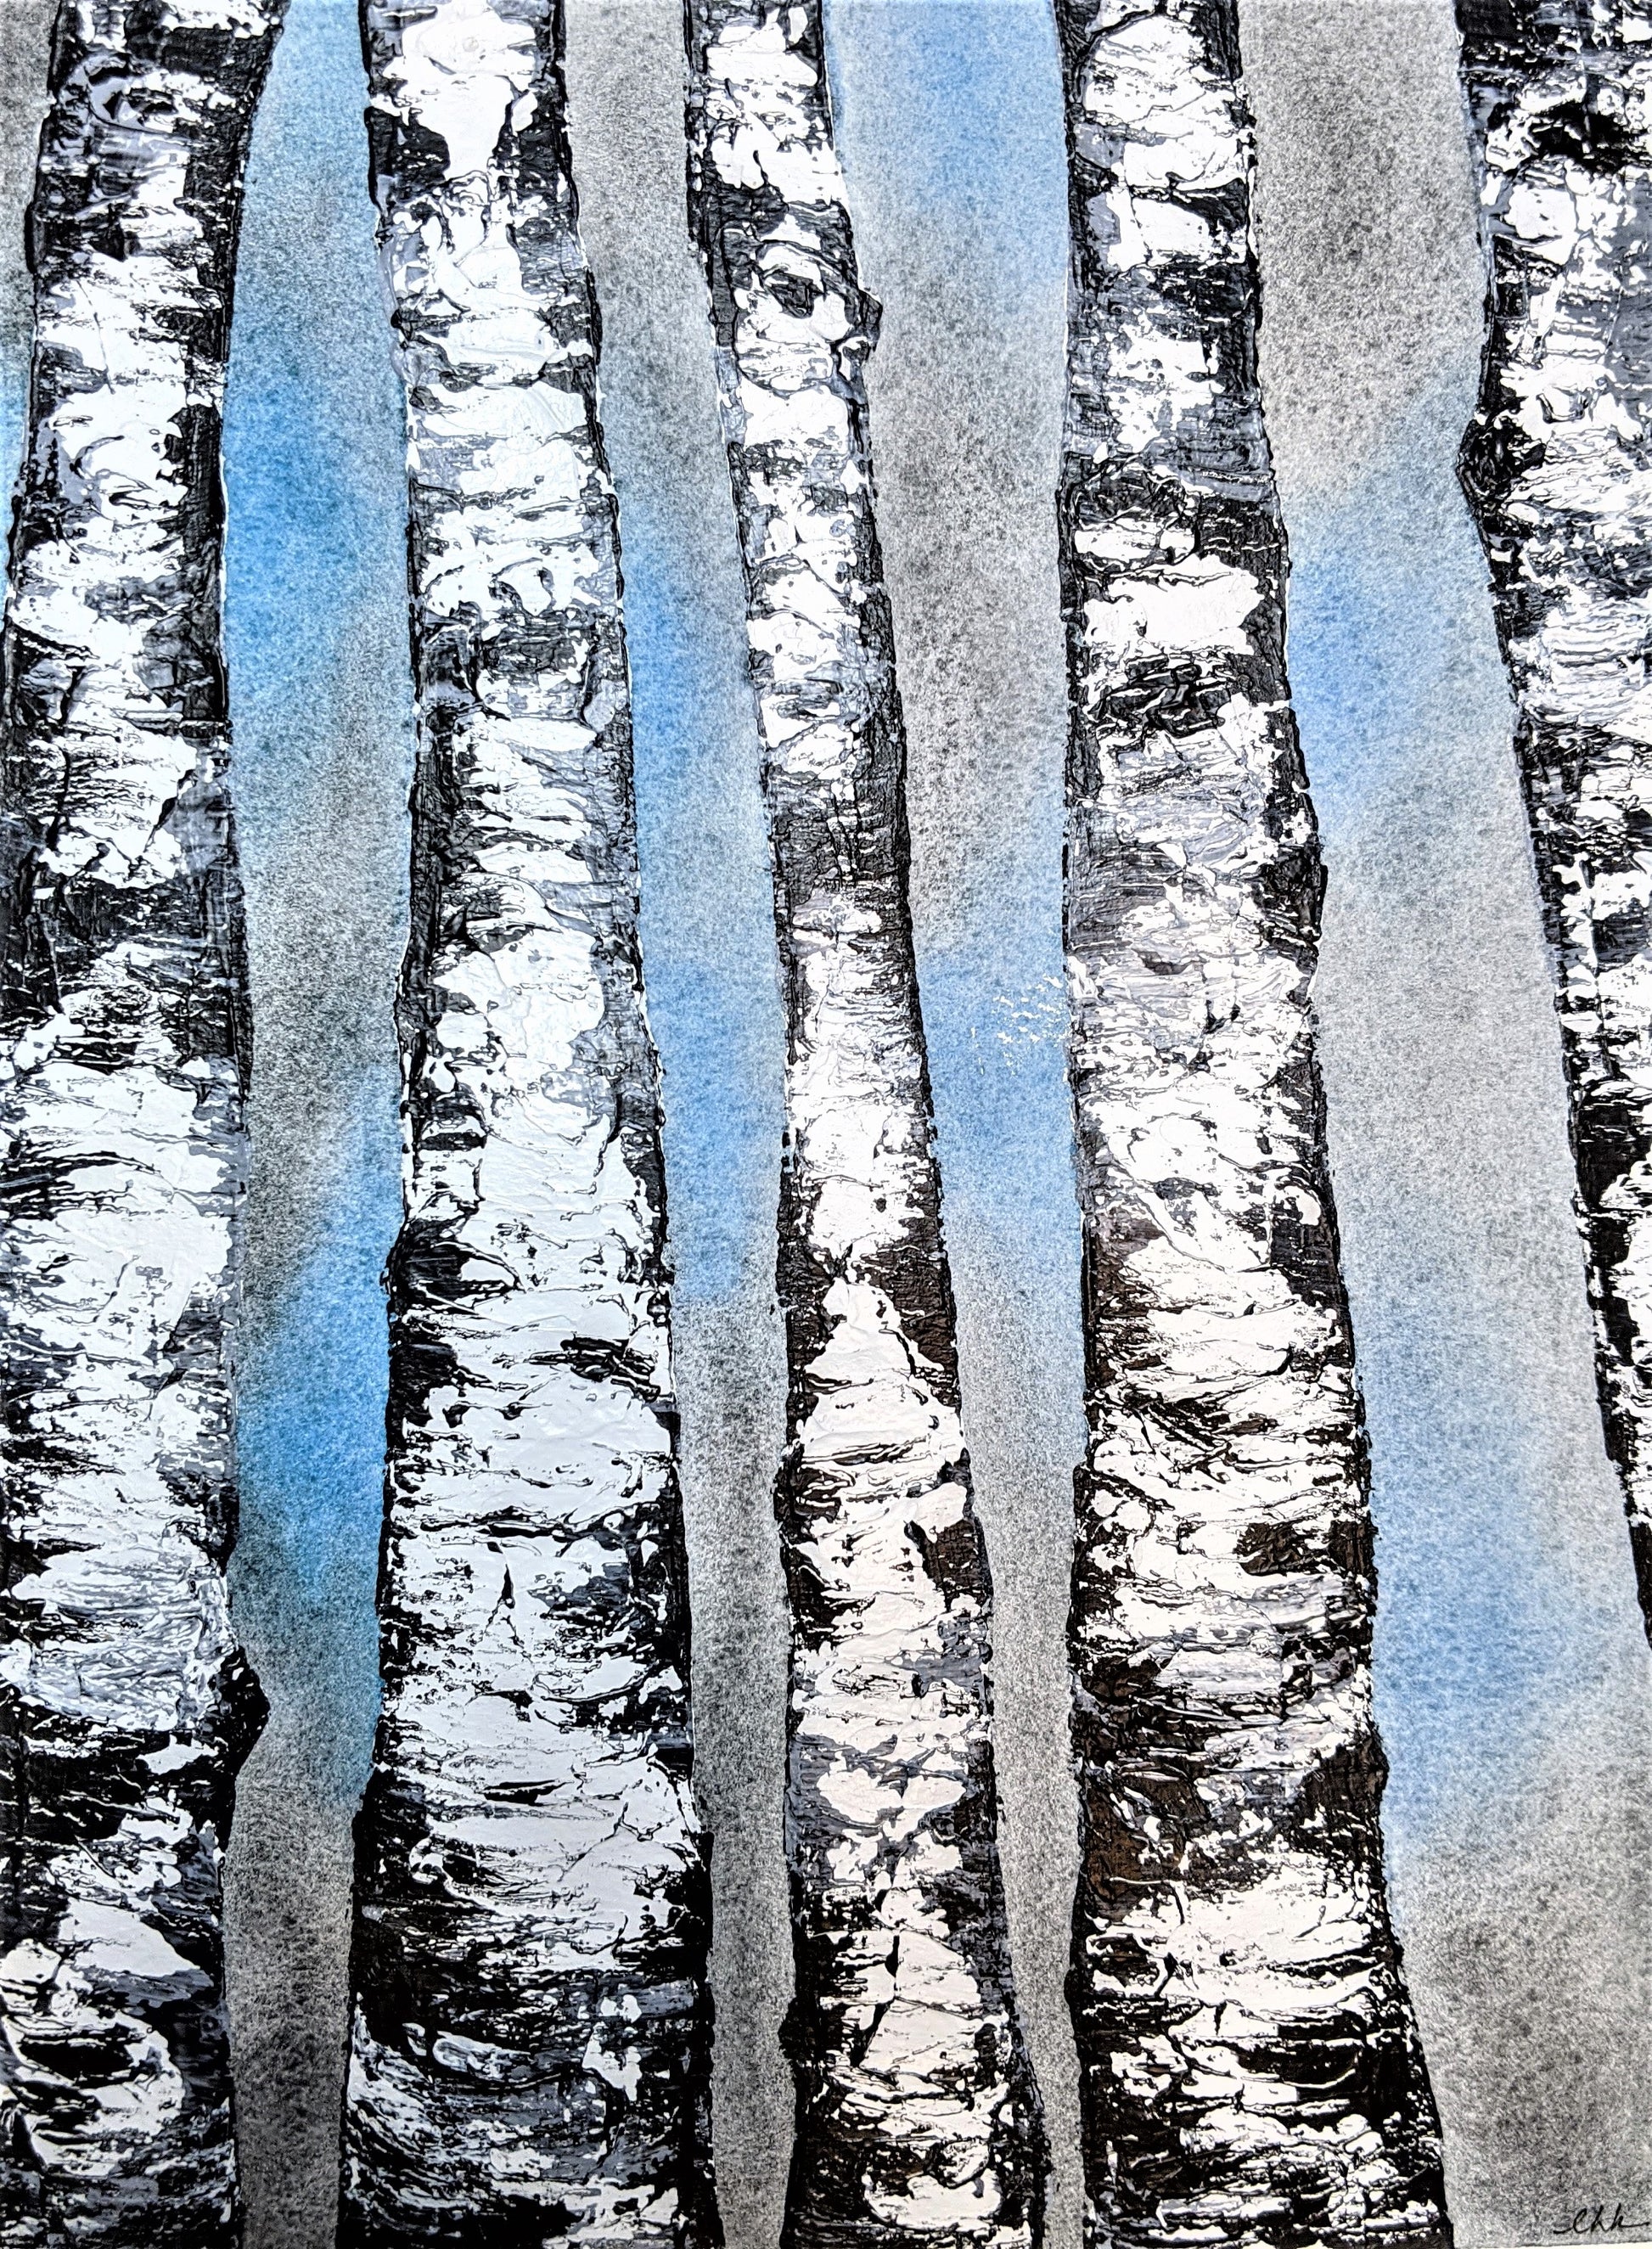 Birches for Tony watercolor and acrylic painting on paper